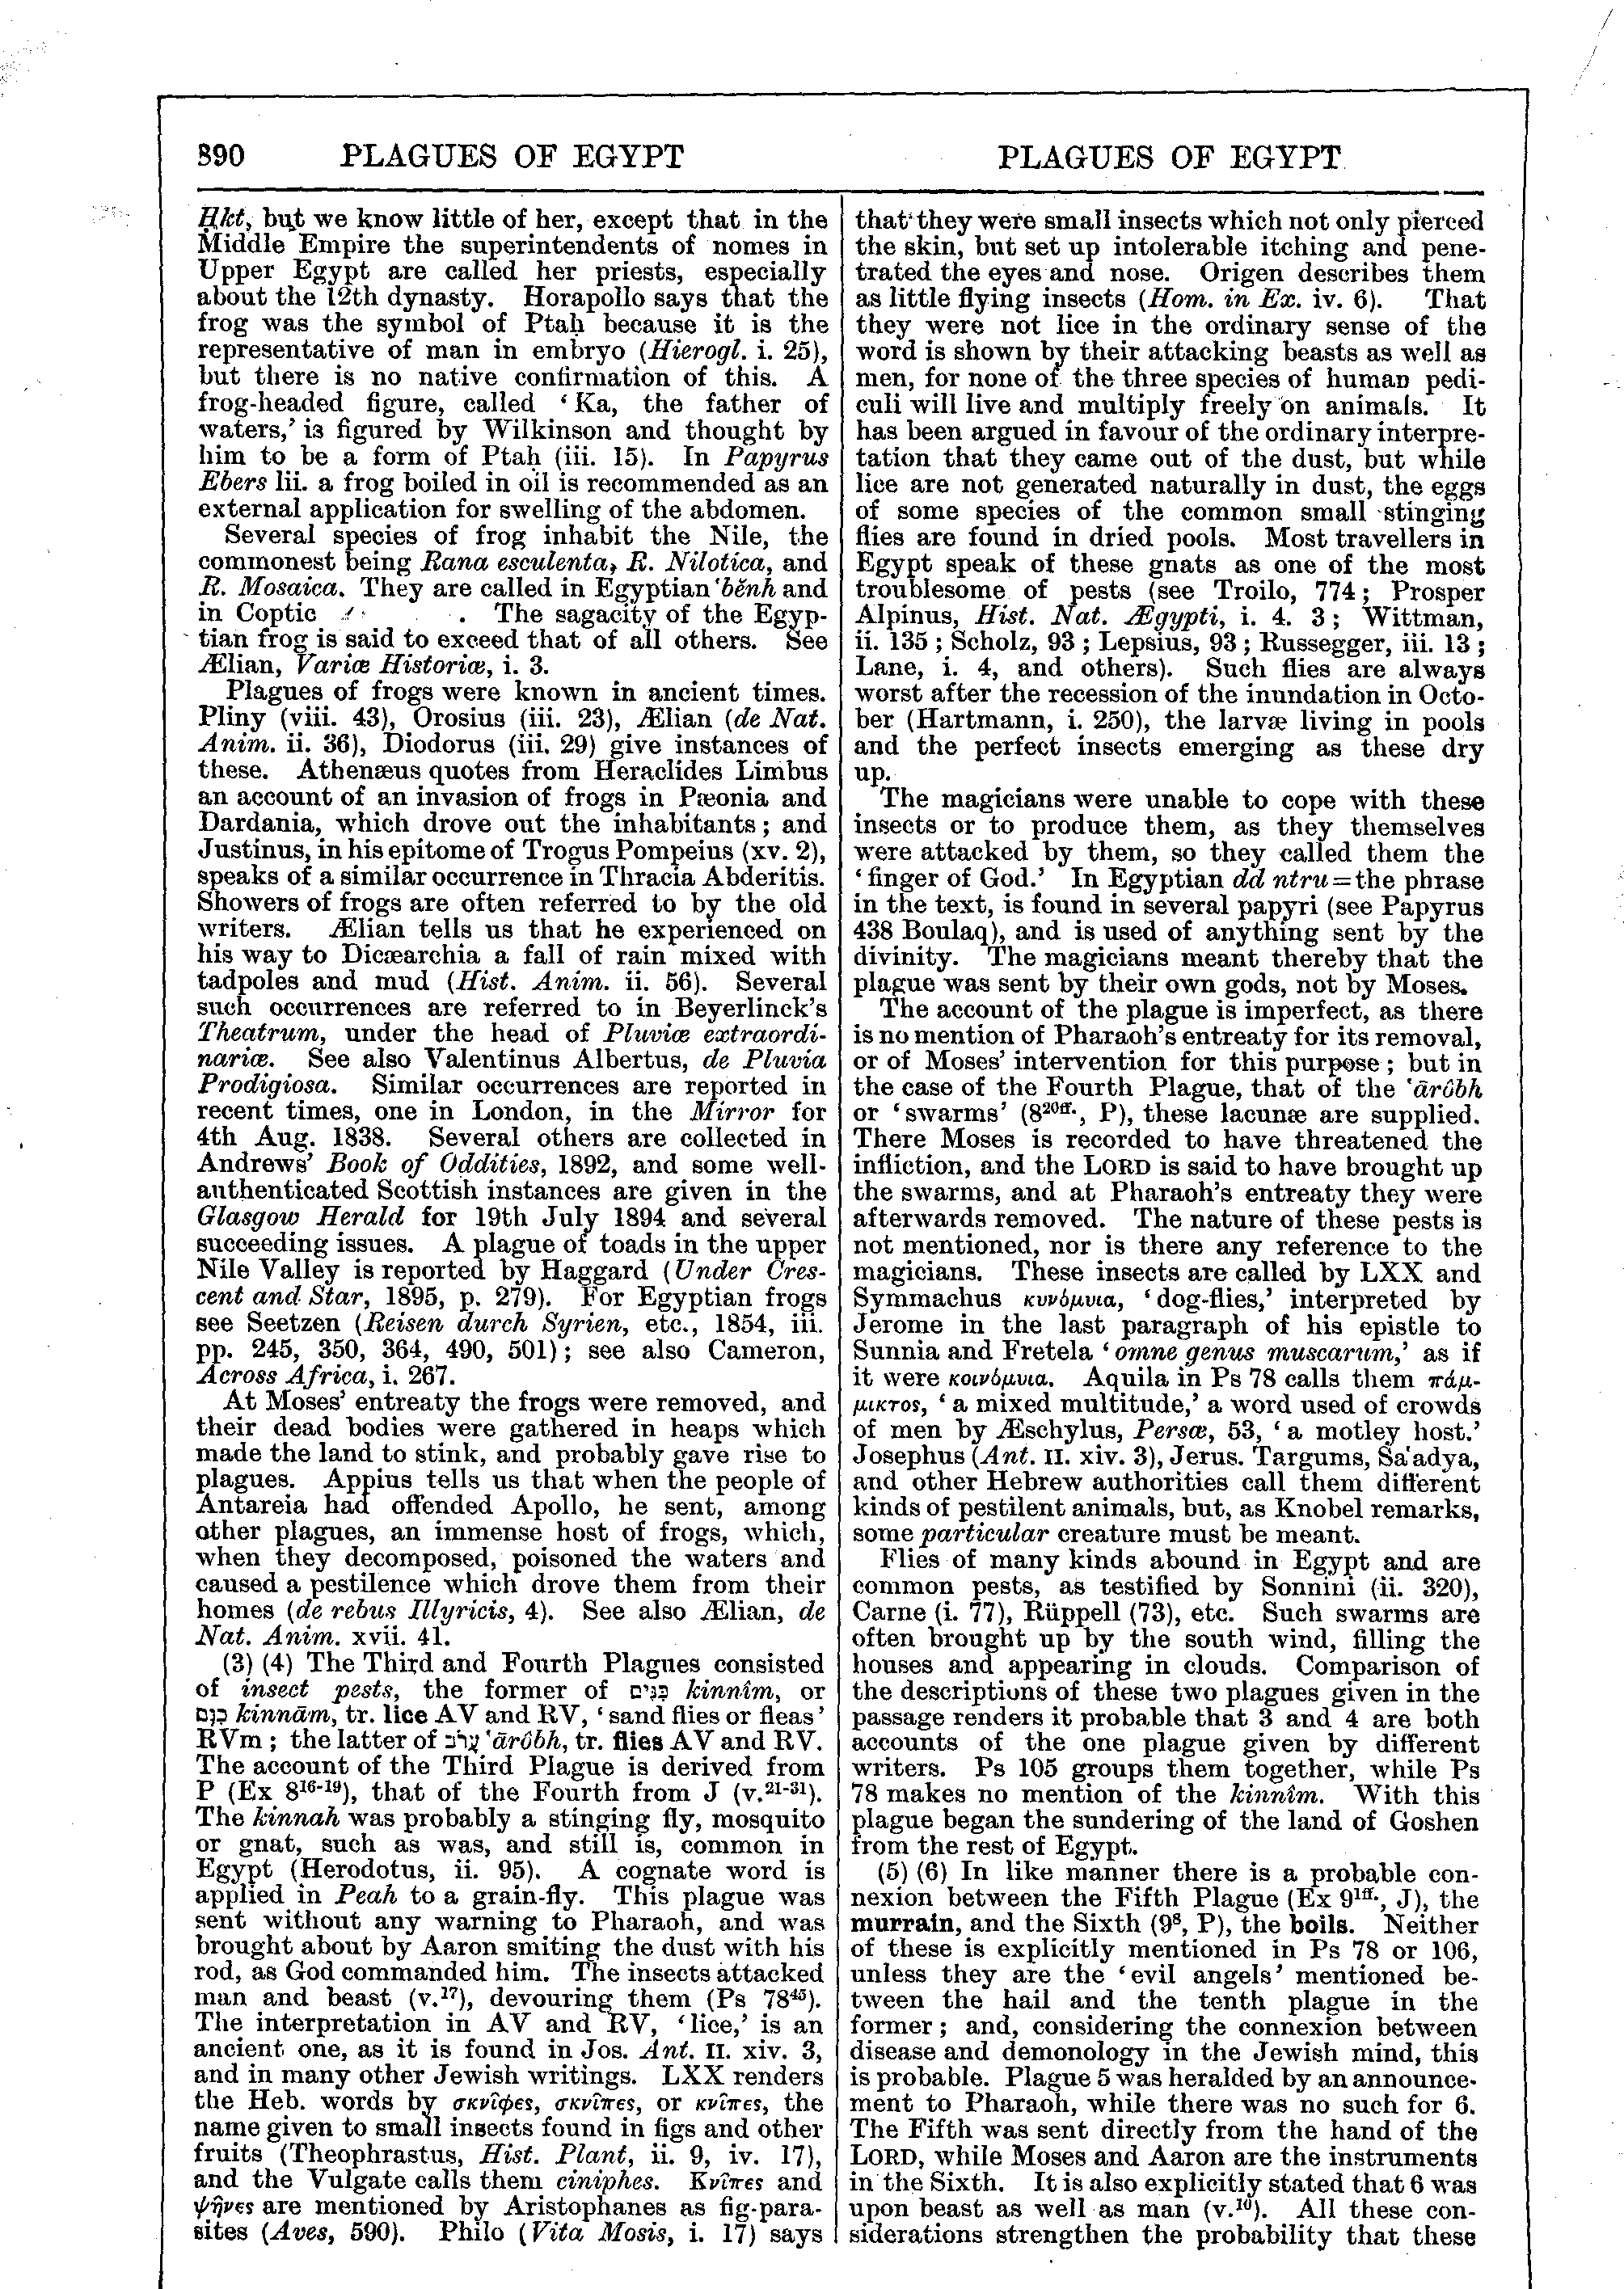 Image of page 890